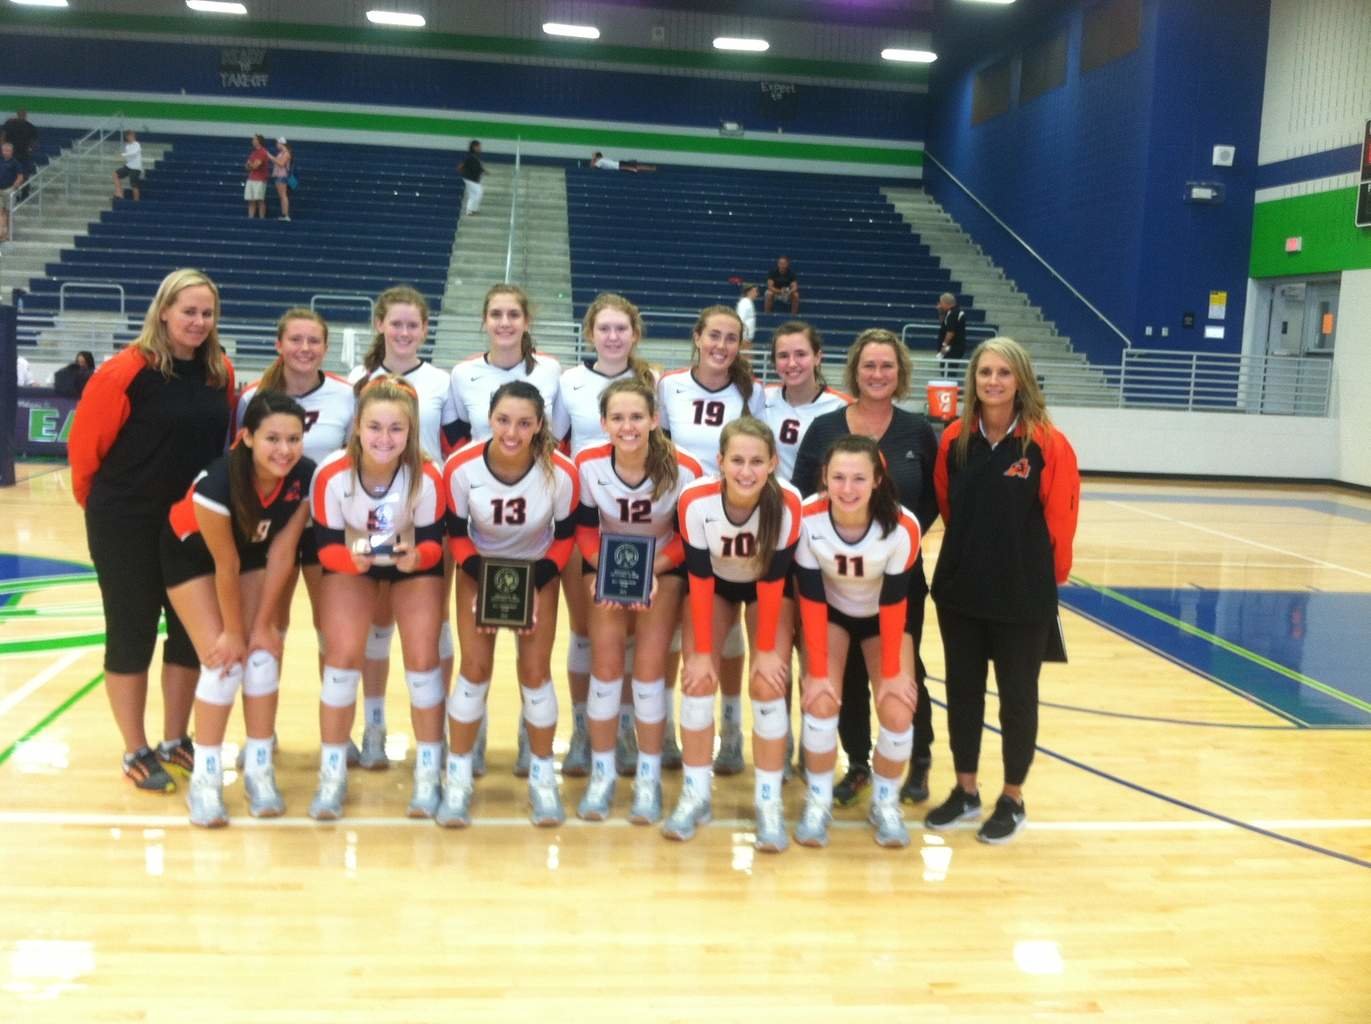 Capturing second place at the Northwest Volleyball Classic were the Aledo Ladycats, who are gathered around their second-place trophy. Also holding awards are Maddie Goings (13) and Emily Smith (12) who were each selected to the all-tournament team.